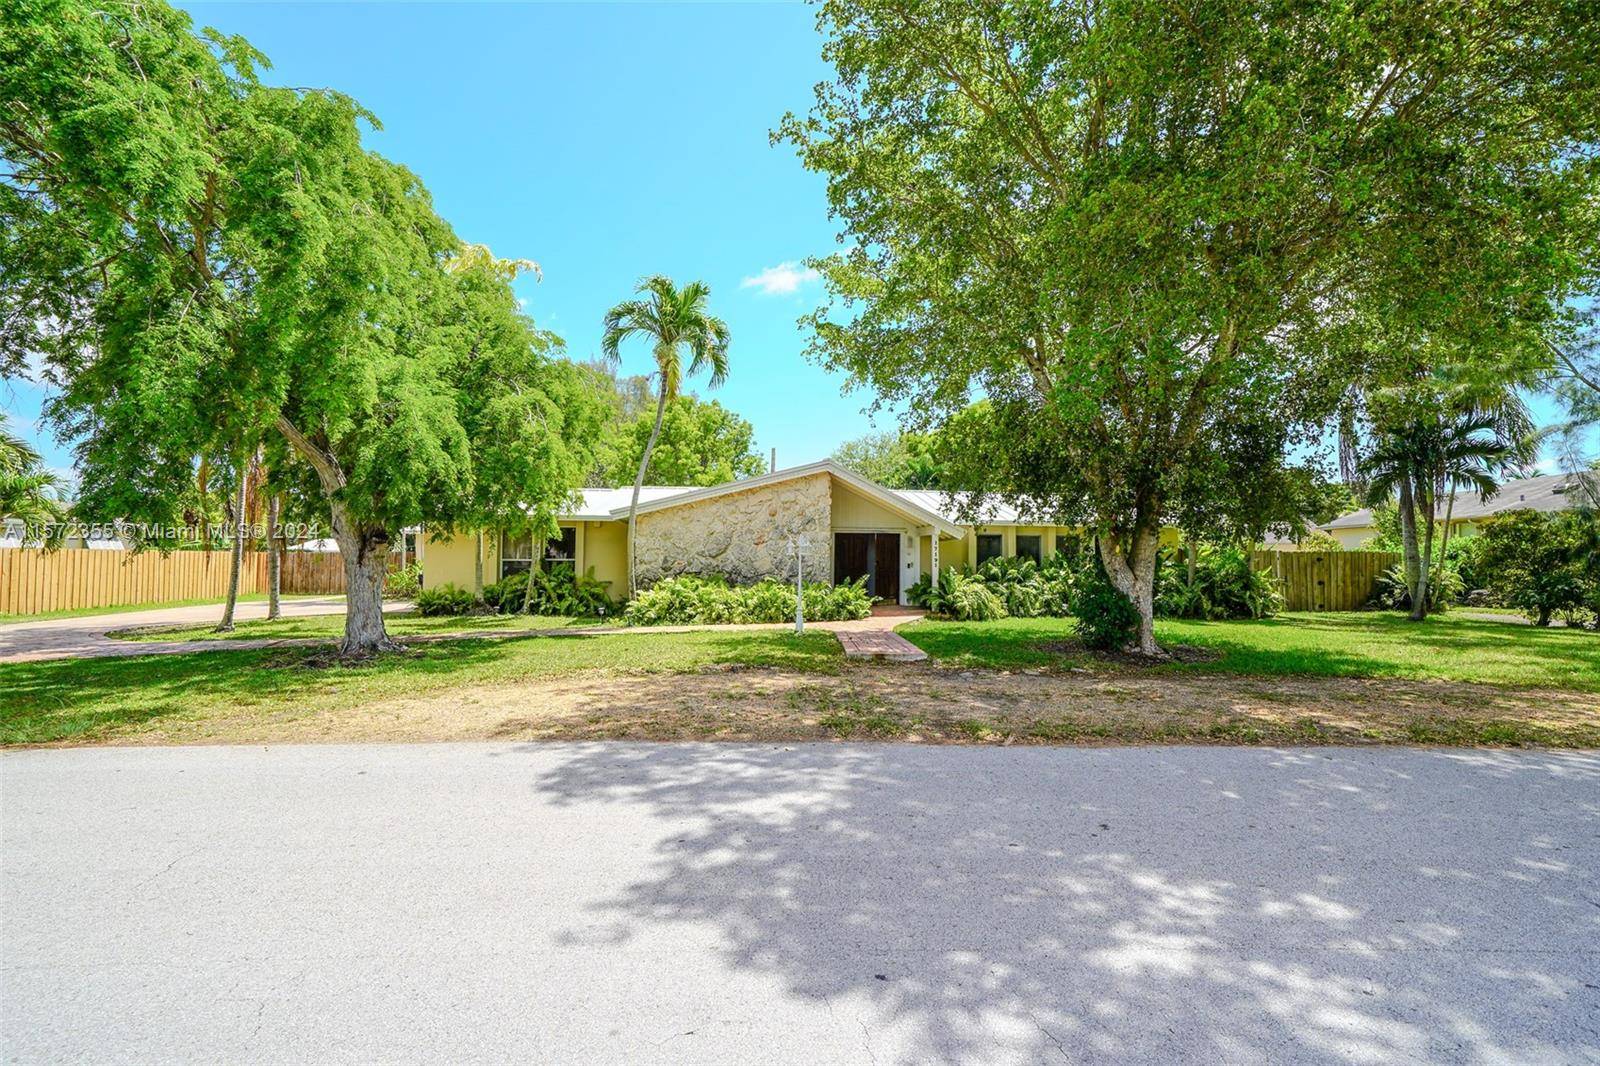 This Palmetto Bay 4 bedroom, 3 bathroom home with a 1 bedroom 1 bathroom, 2004 built guest house, pool home is gracefully situated along a tranquil canal.